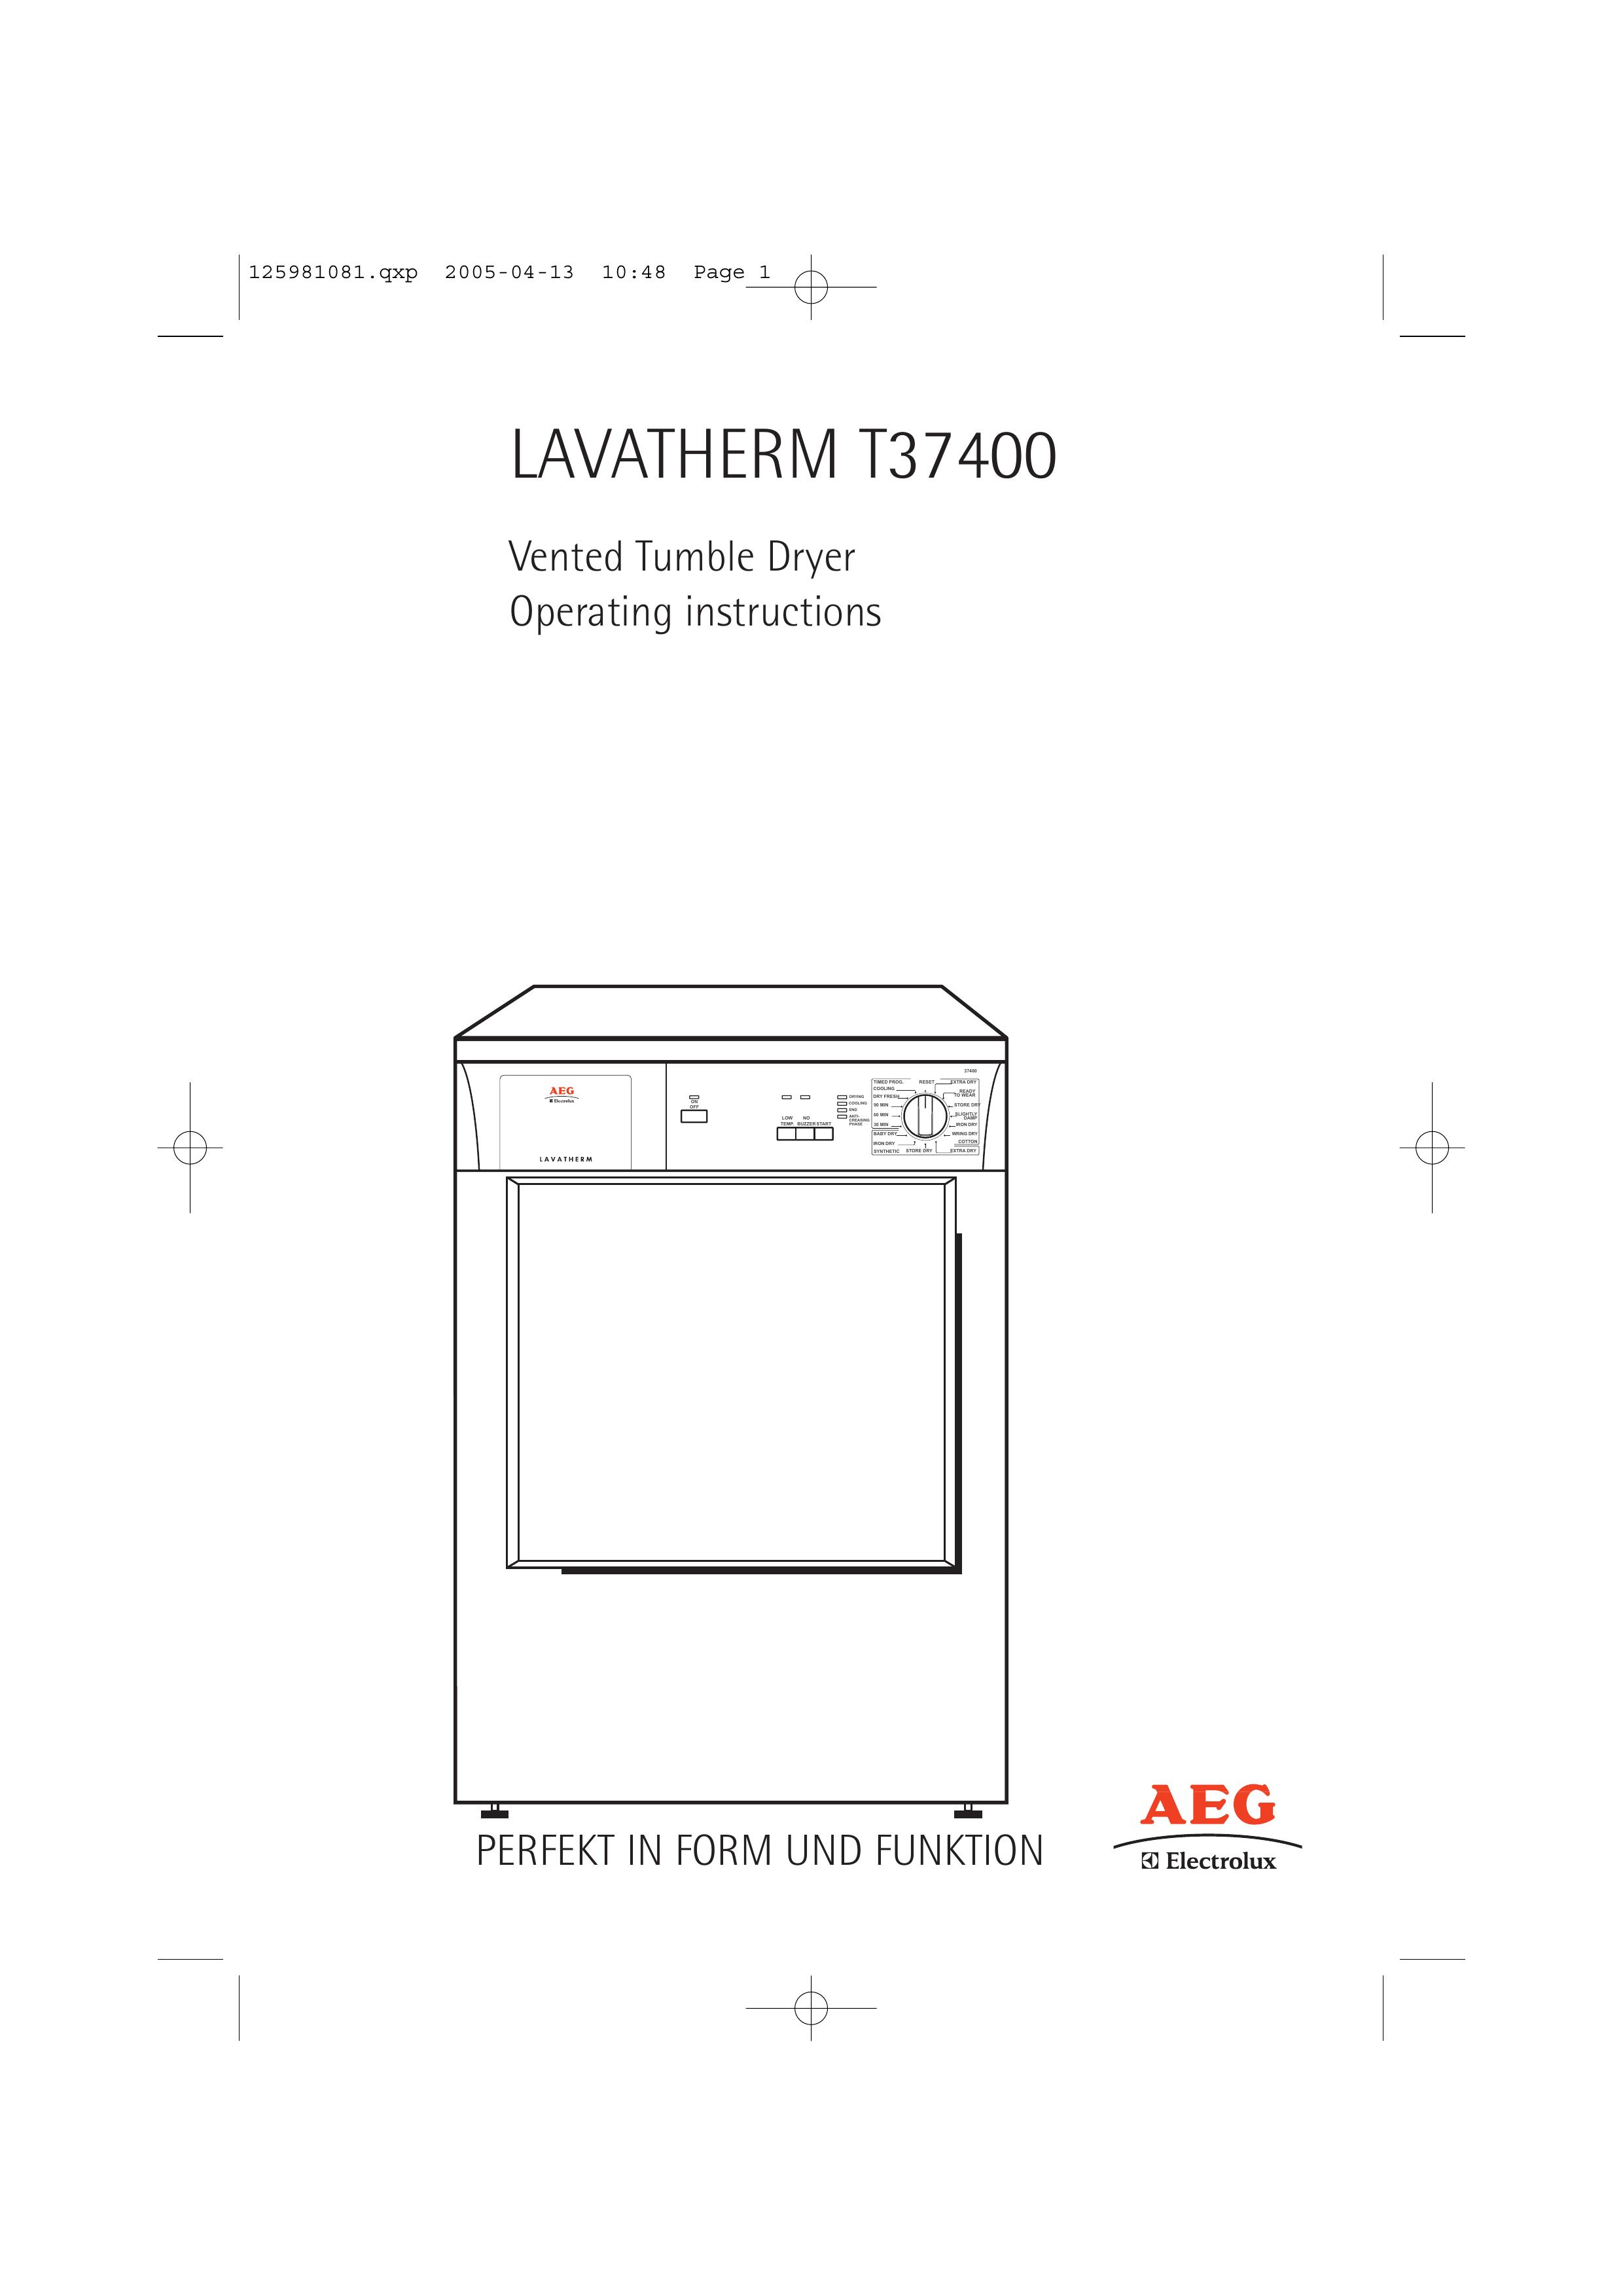 AEG T37400 Clothes Dryer User Manual